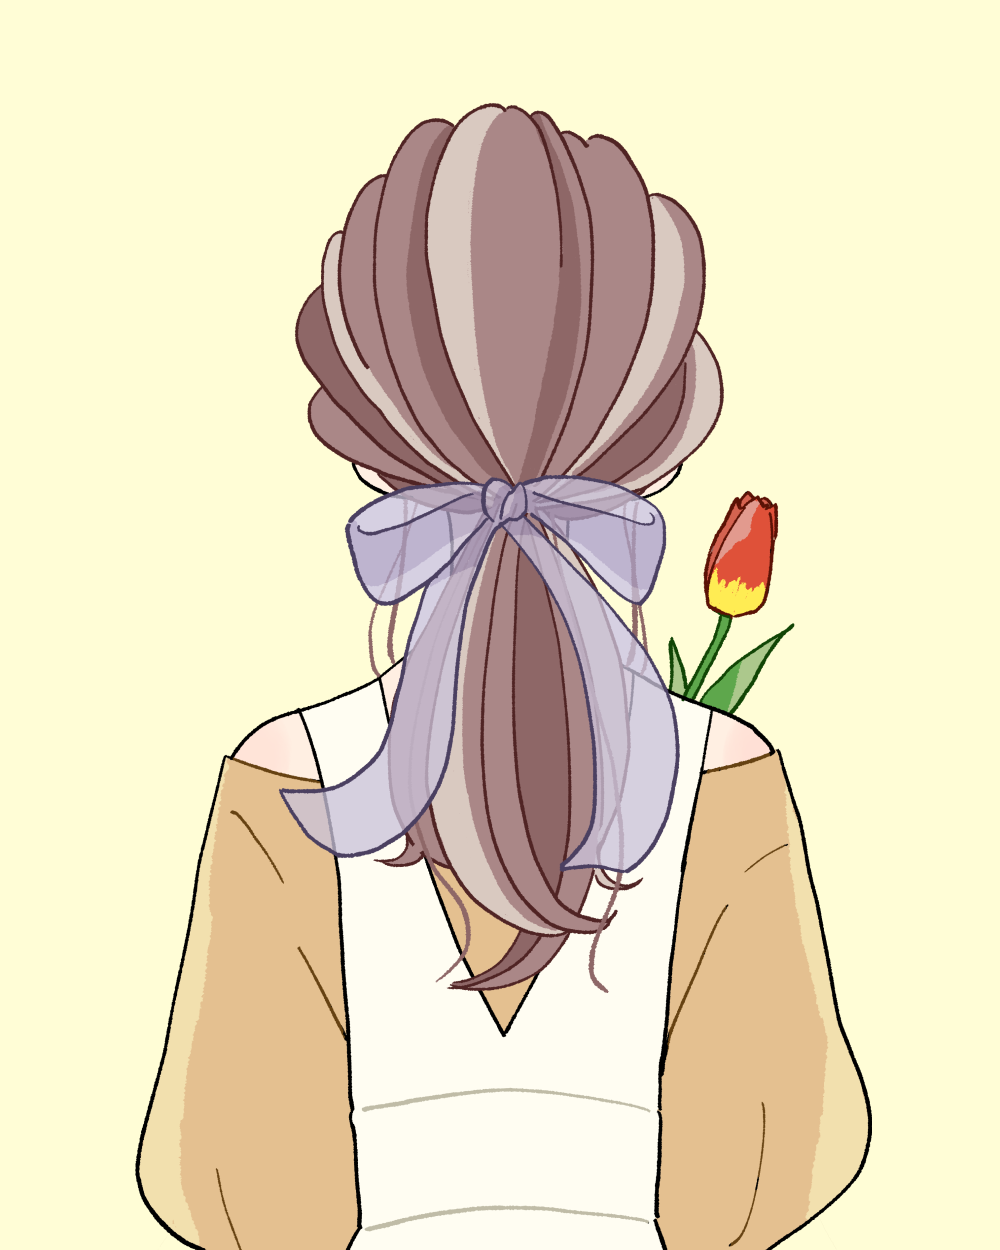 Free illustration of a tulips and big ribbon girl